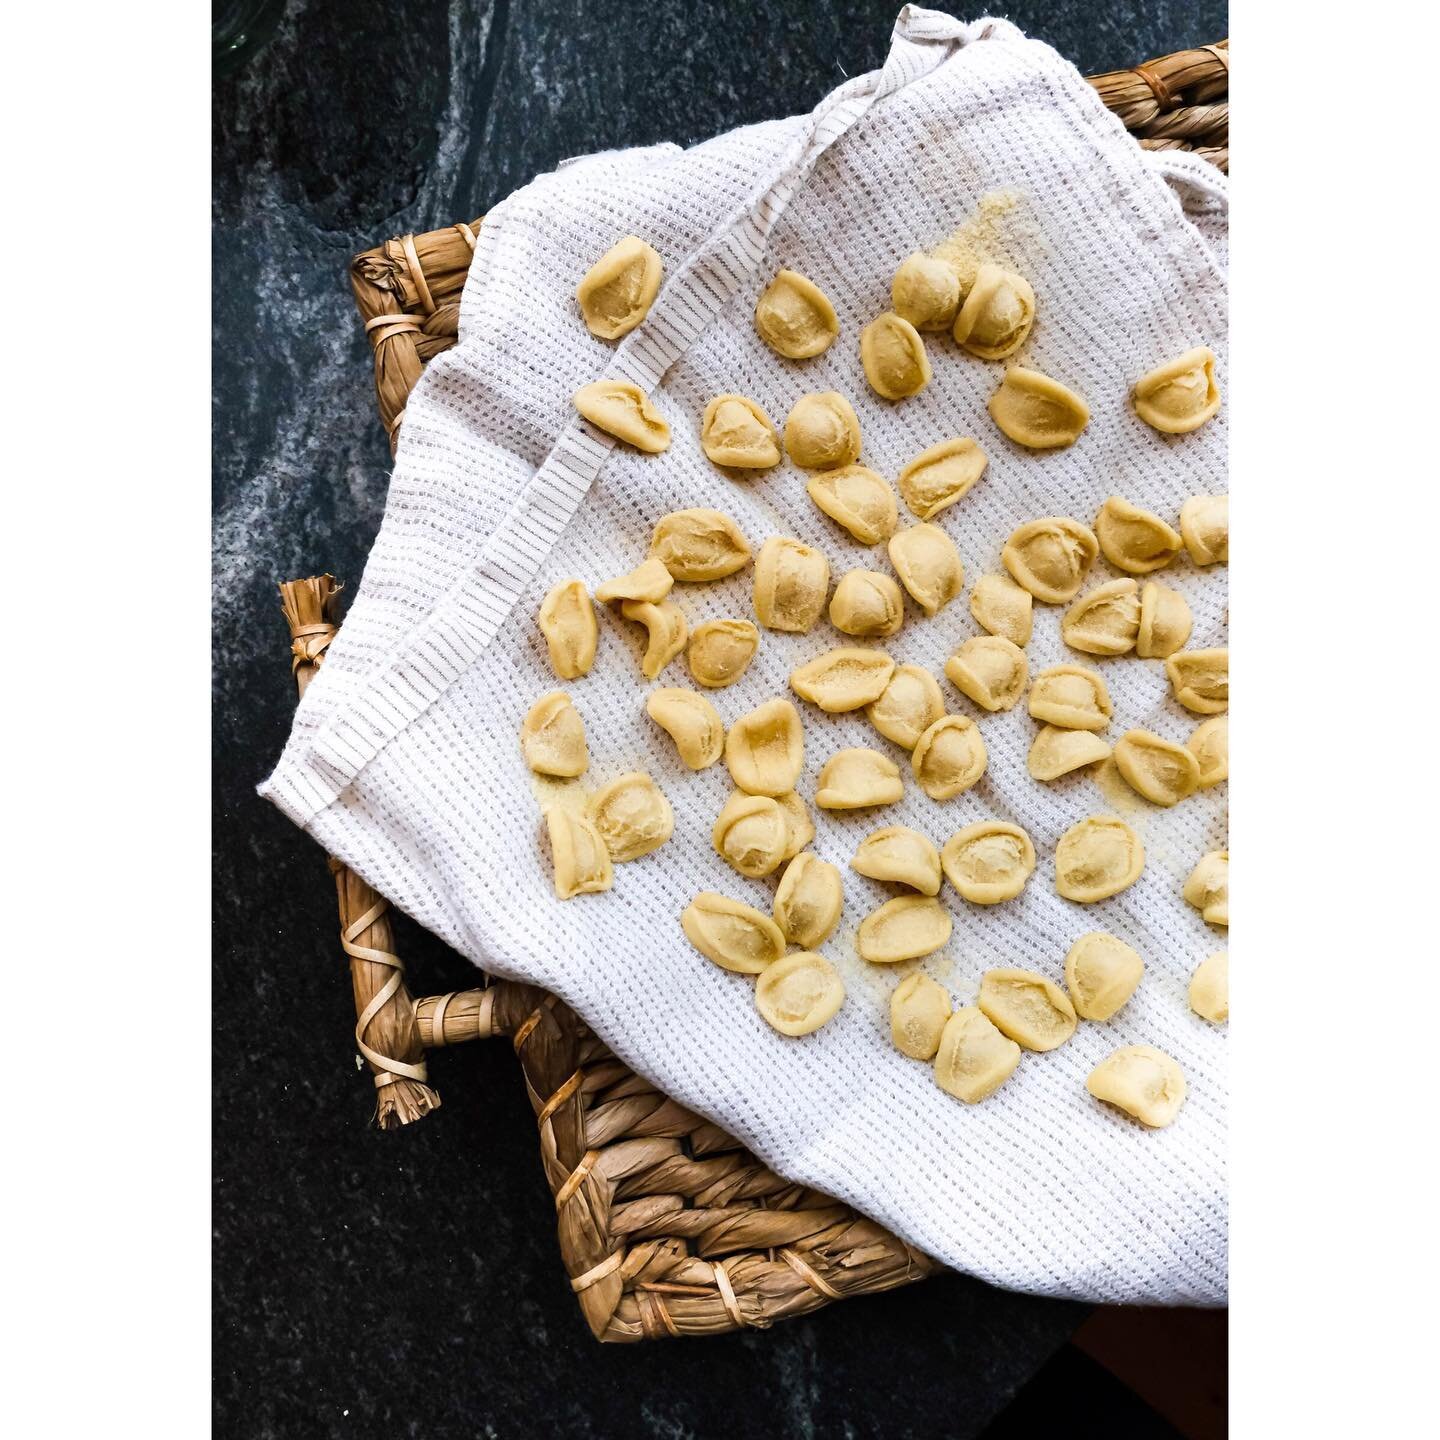 When in a kitchen with a giant butcher block island, the urge to make fresh pasta is too strong to ignore! A batch of handmade orecchiette to be served up with slow cooked bolognese. @johnboosco putting your countertops to good use over here! 
.
.
.
